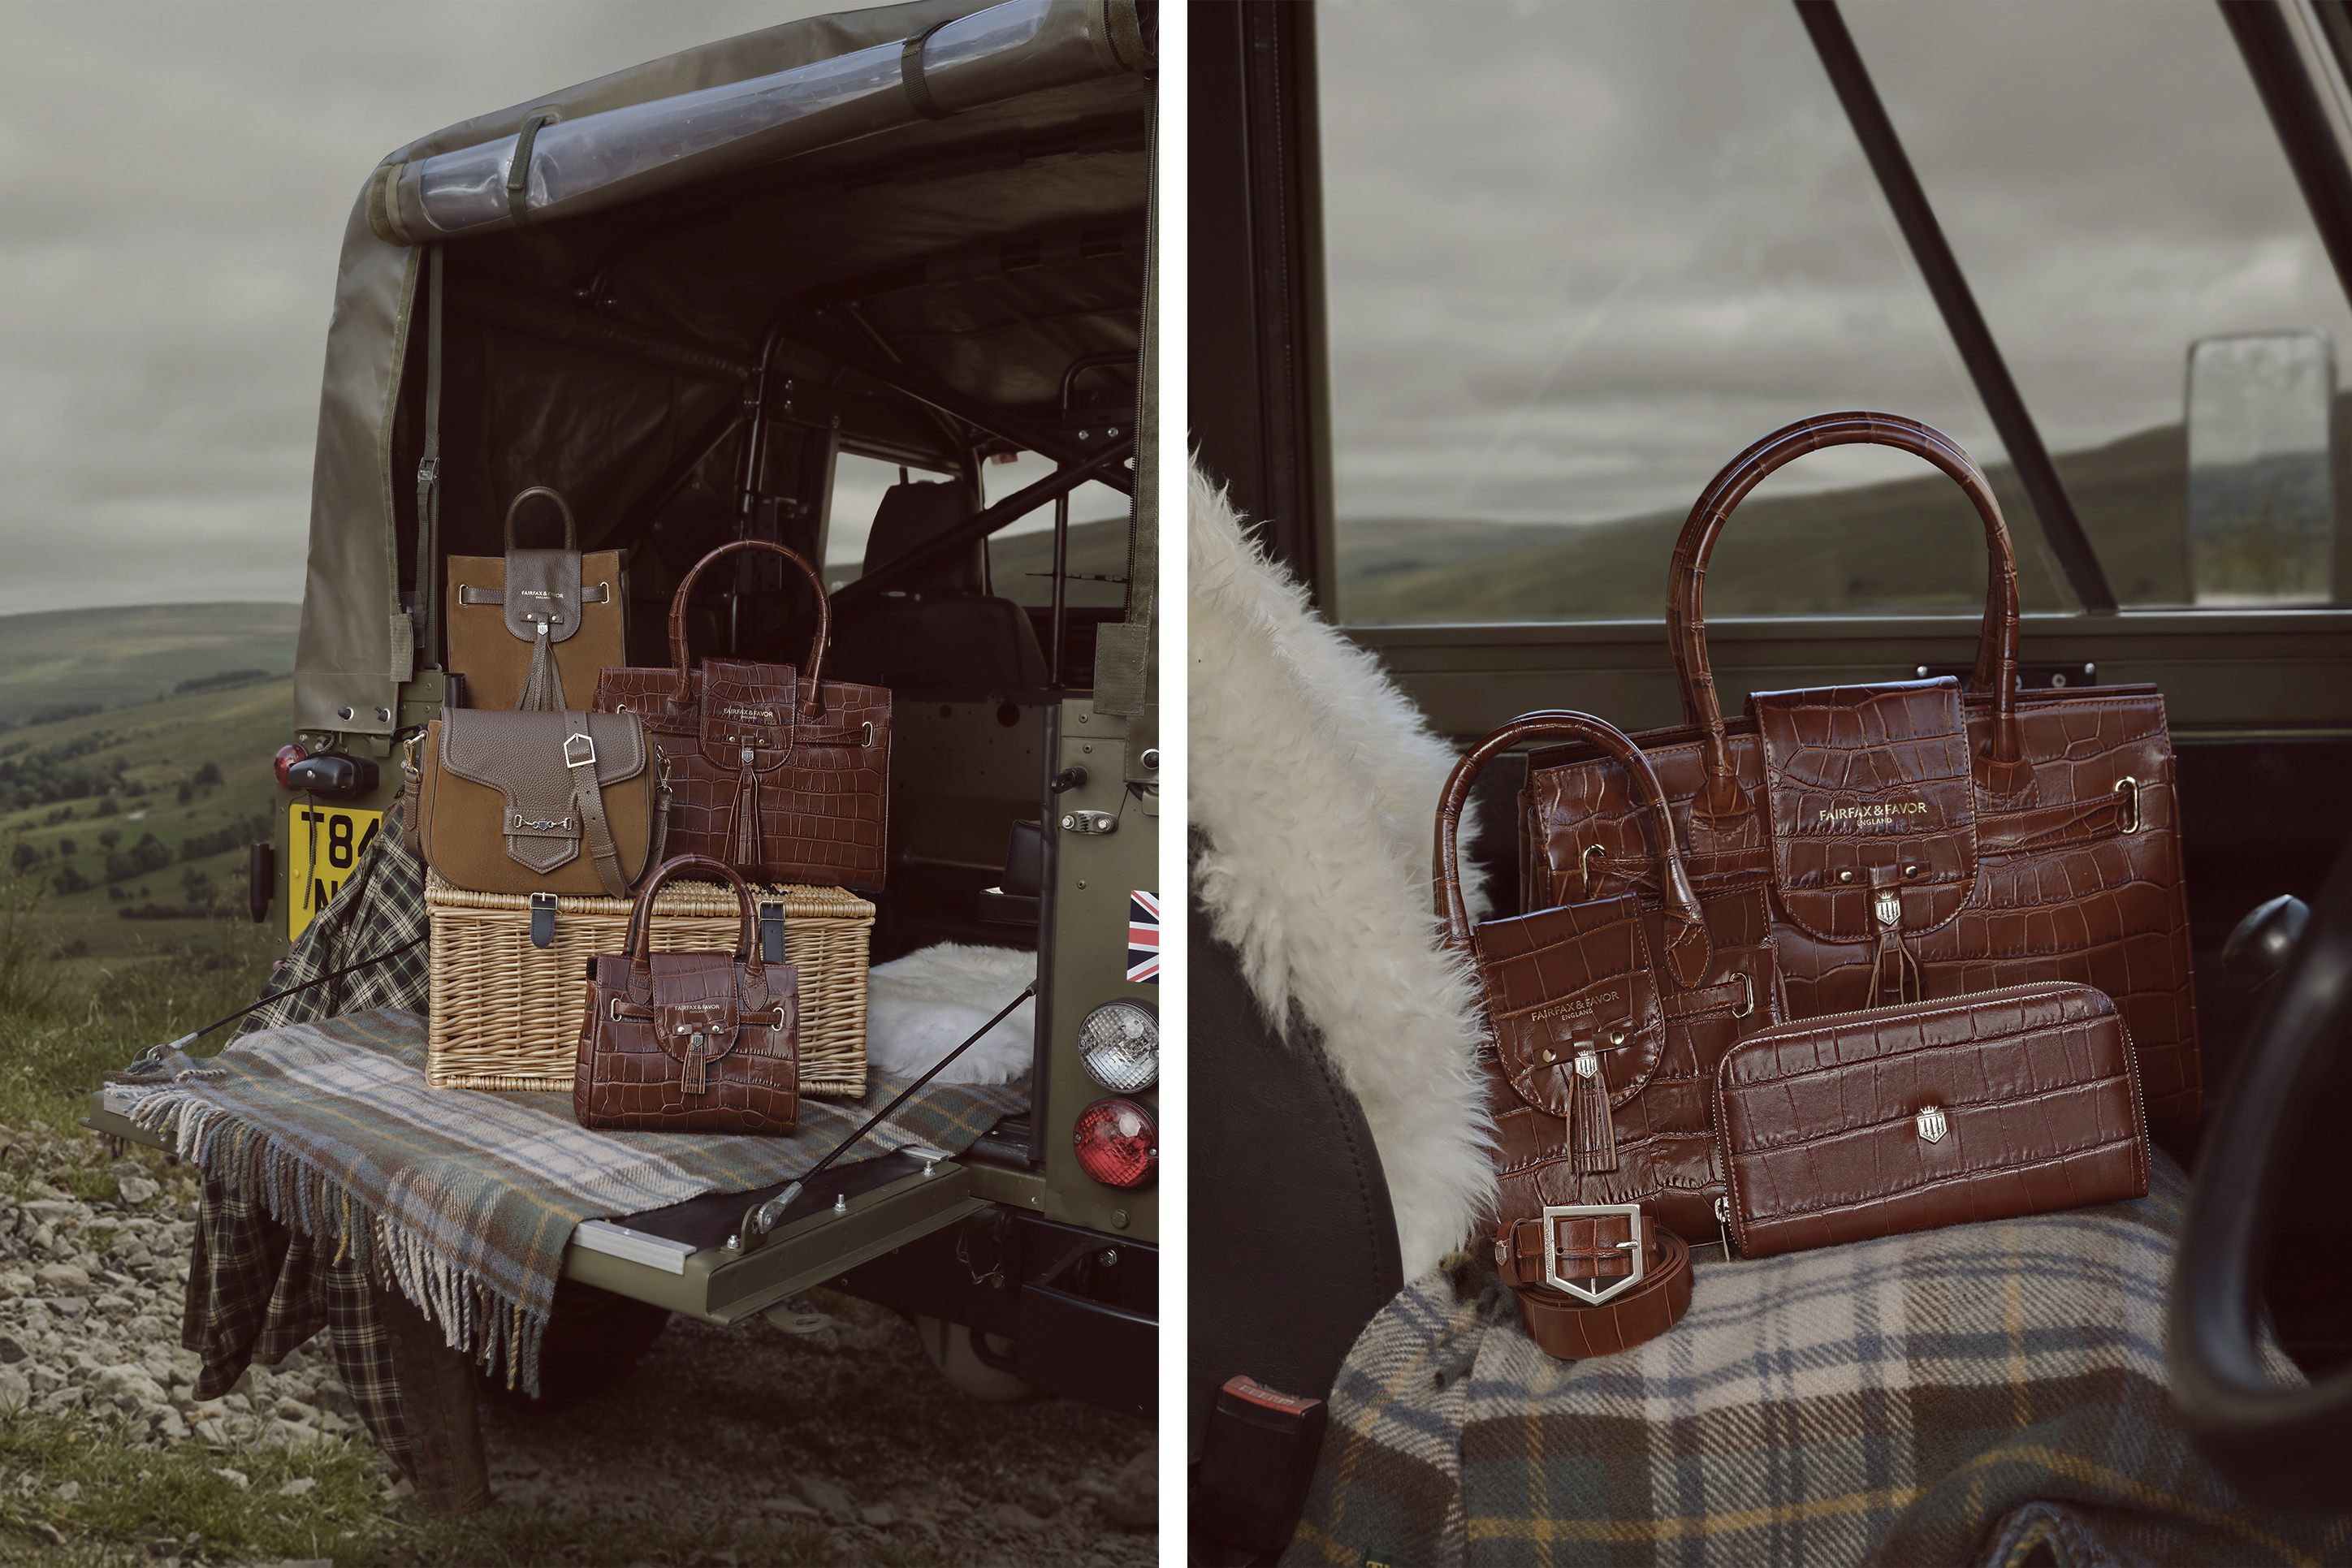 Fairfax & favour handbags in a land rover in Location Photo shoot in Norfolk countryside England